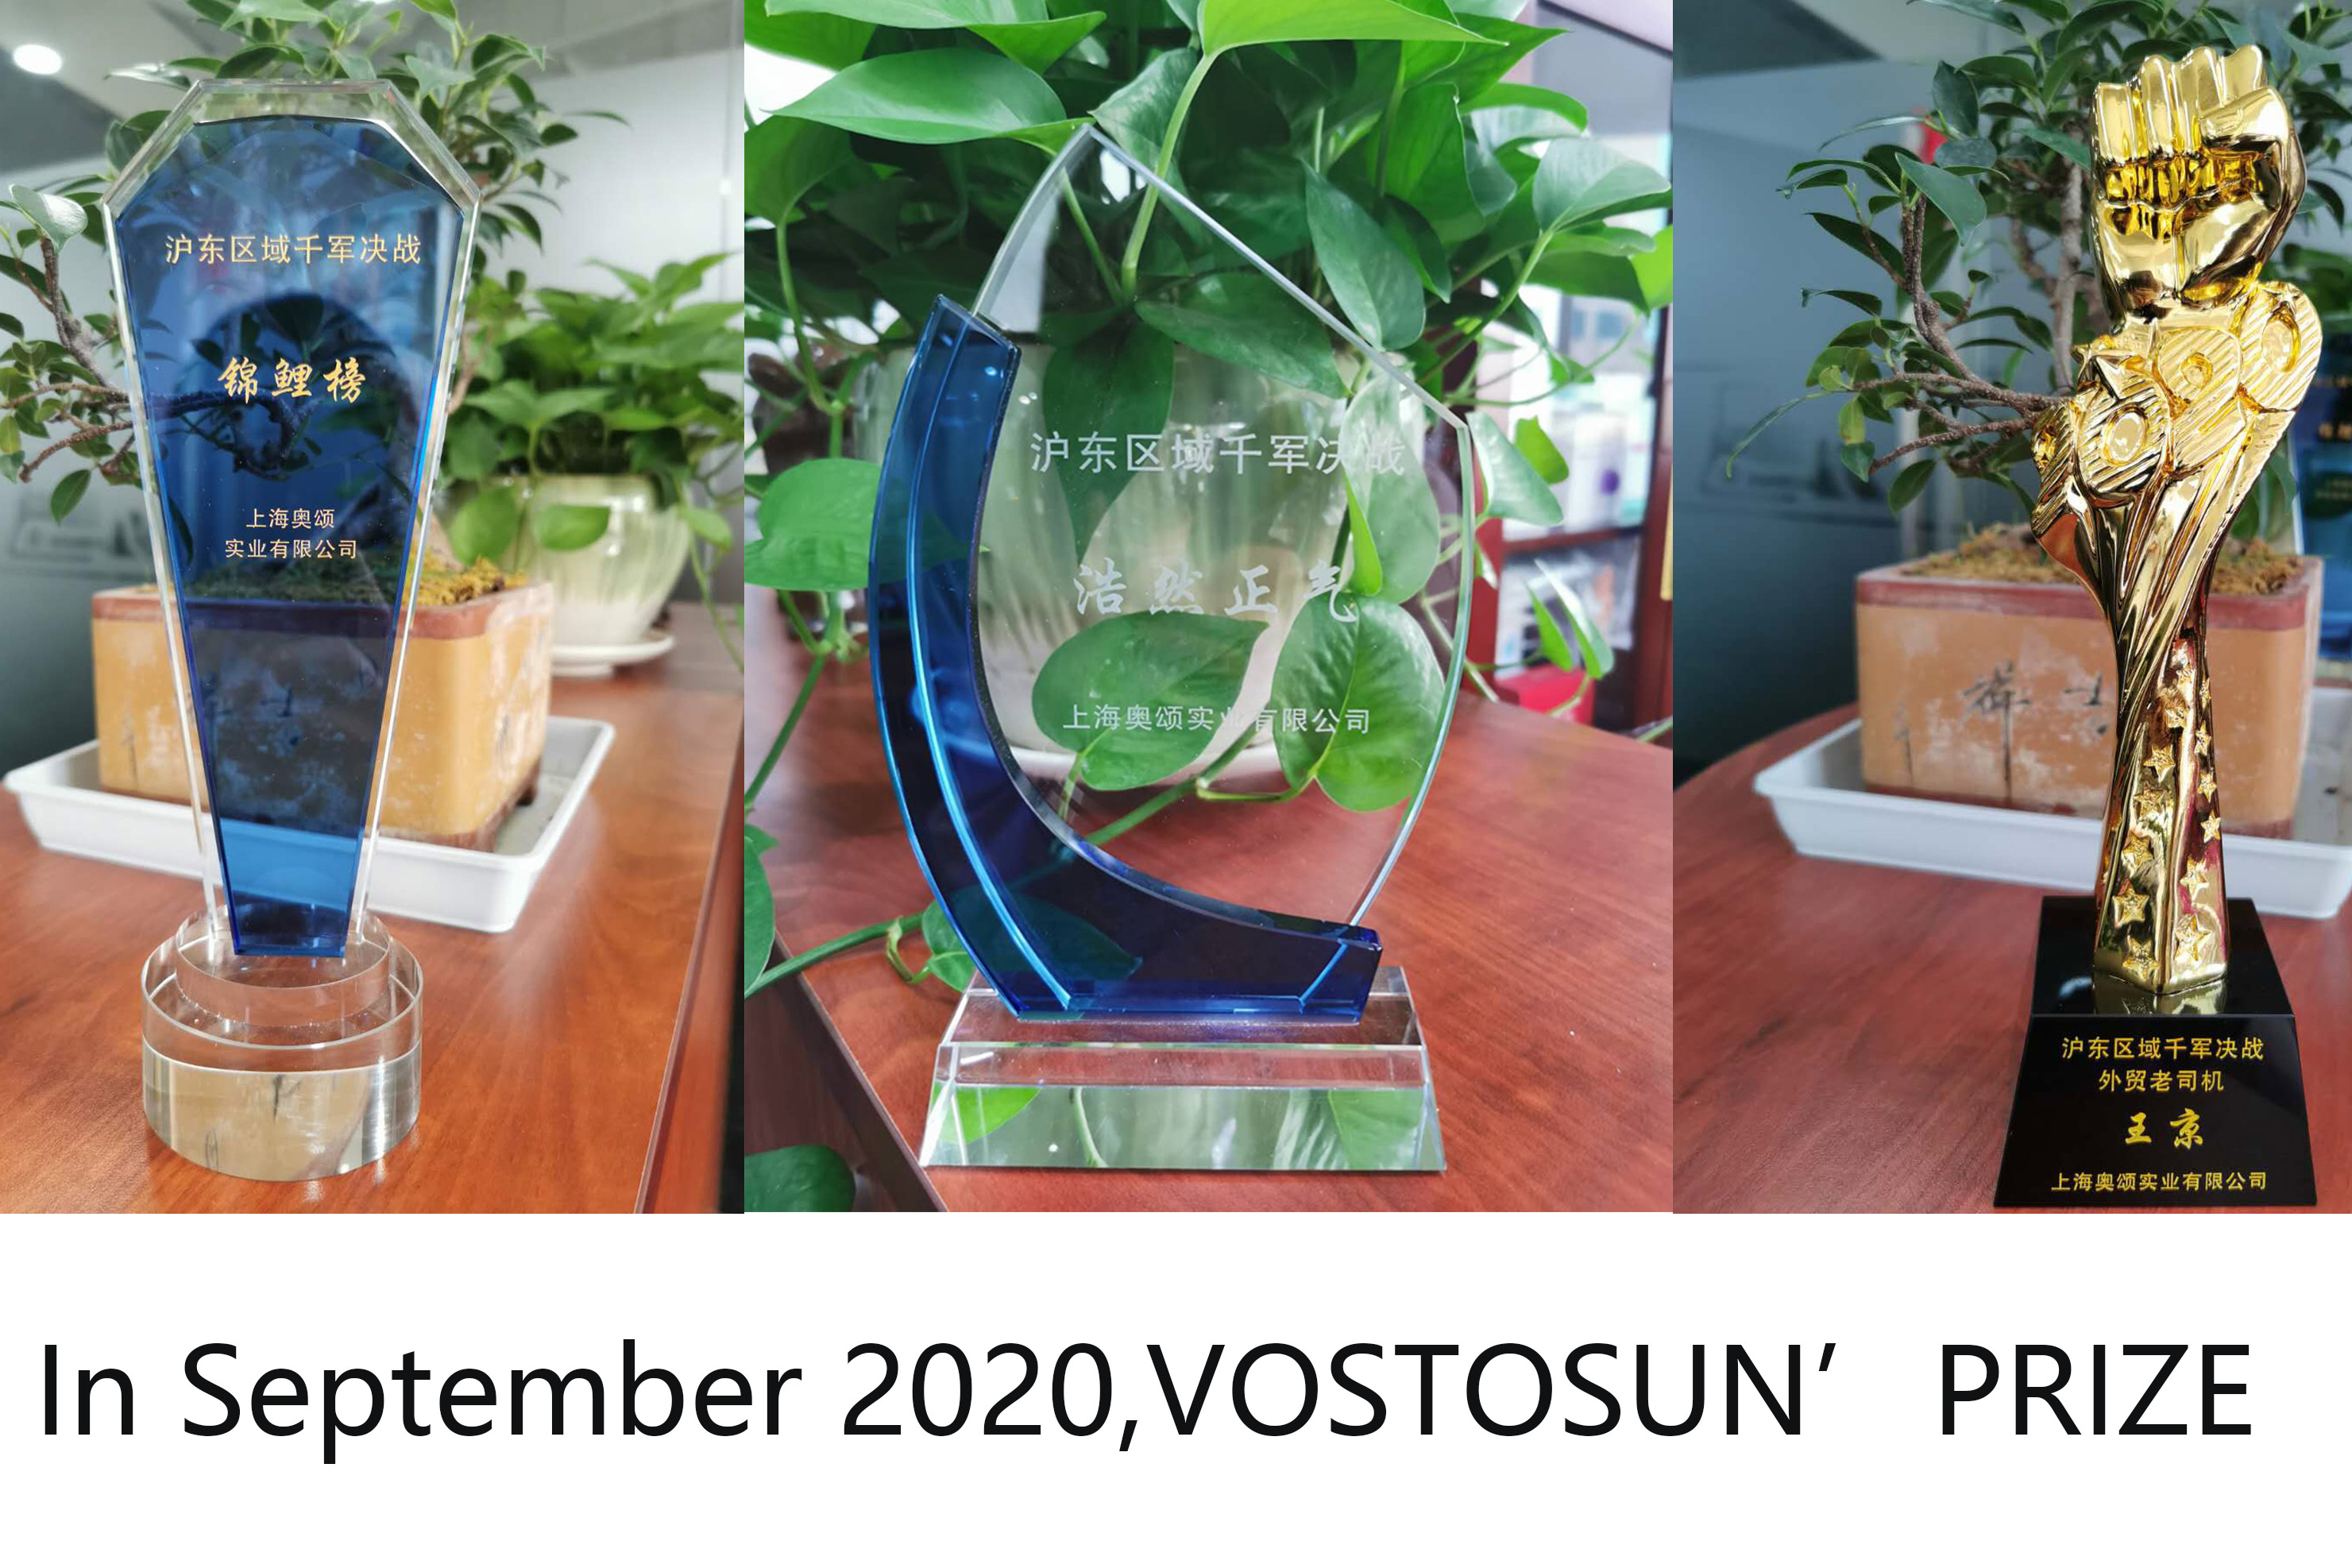 In September 2020, Vostosun achieved good results in the Alibaba Sourcing Festival.